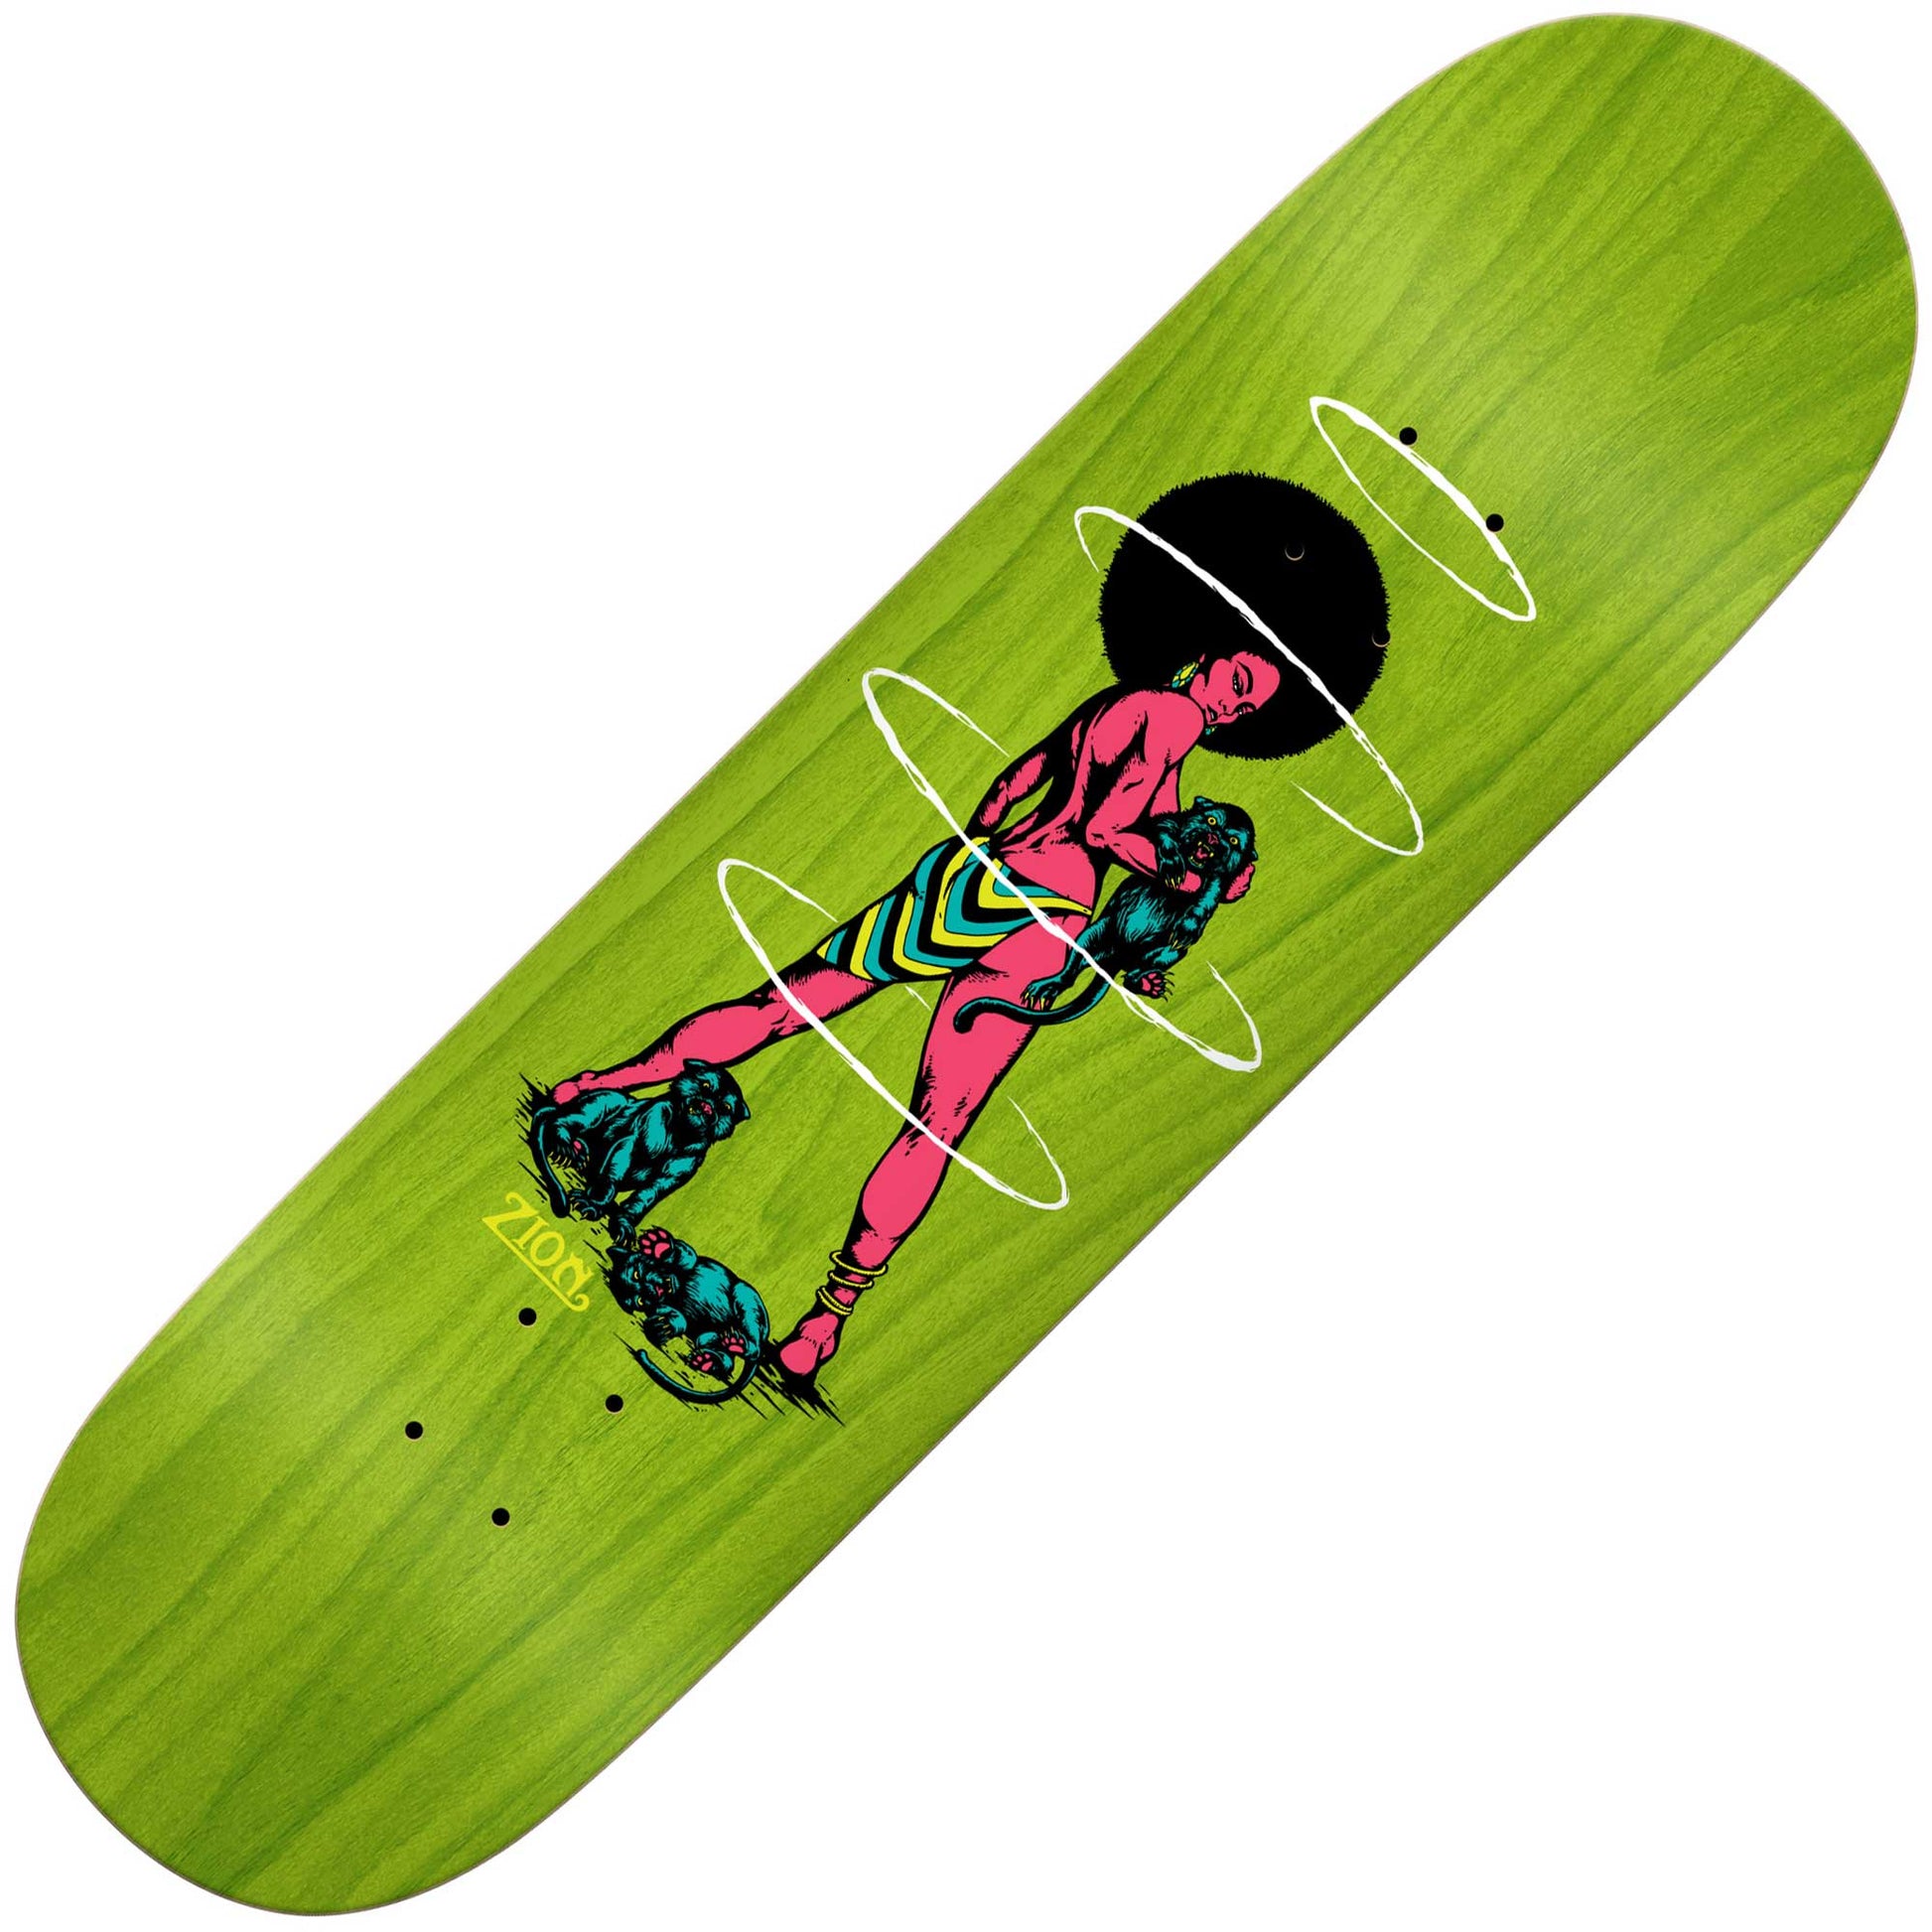 Real Zion Cubs Deck (8.5”) - Tiki Room Skateboards - 1